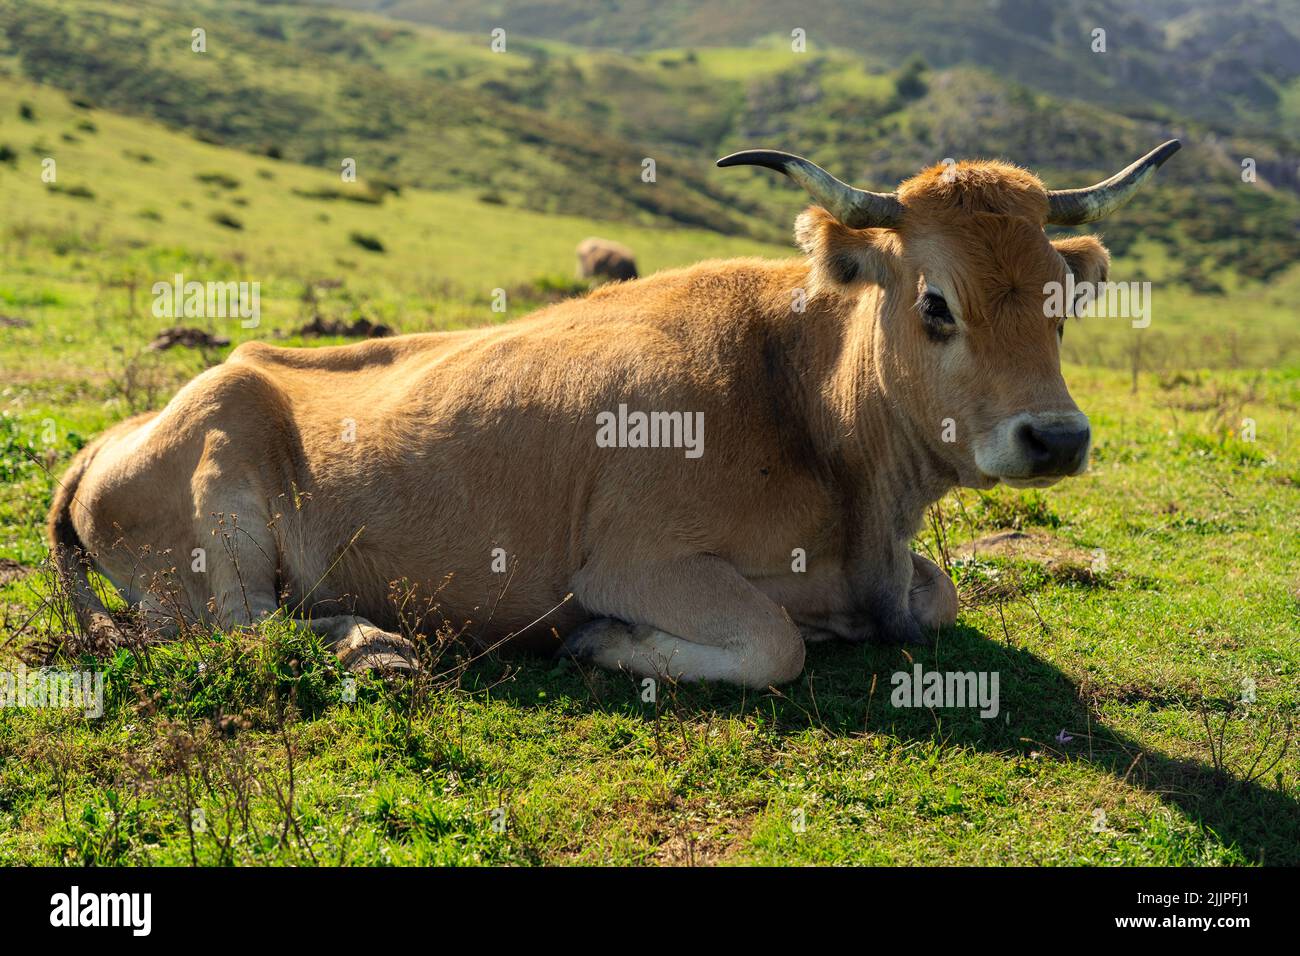 A closeup of a brown cow sitting in a field on a sunny day Stock Photo